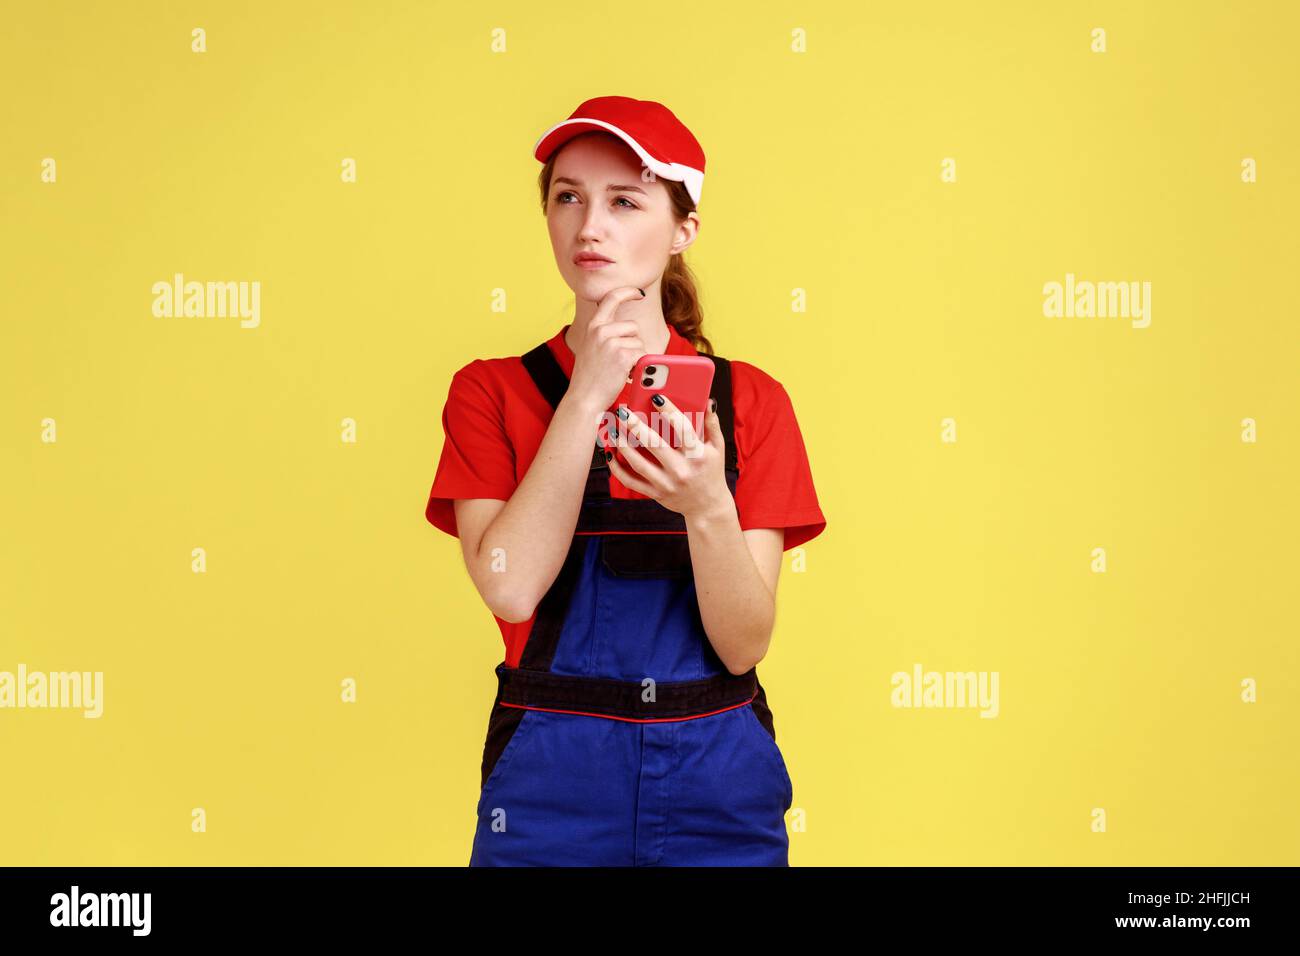 Portrait of thoughtful handy woman using mobile phone for online supporting, having pensive expression, holding chin and looking away Indoor studio shot isolated on yellow background. Stock Photo